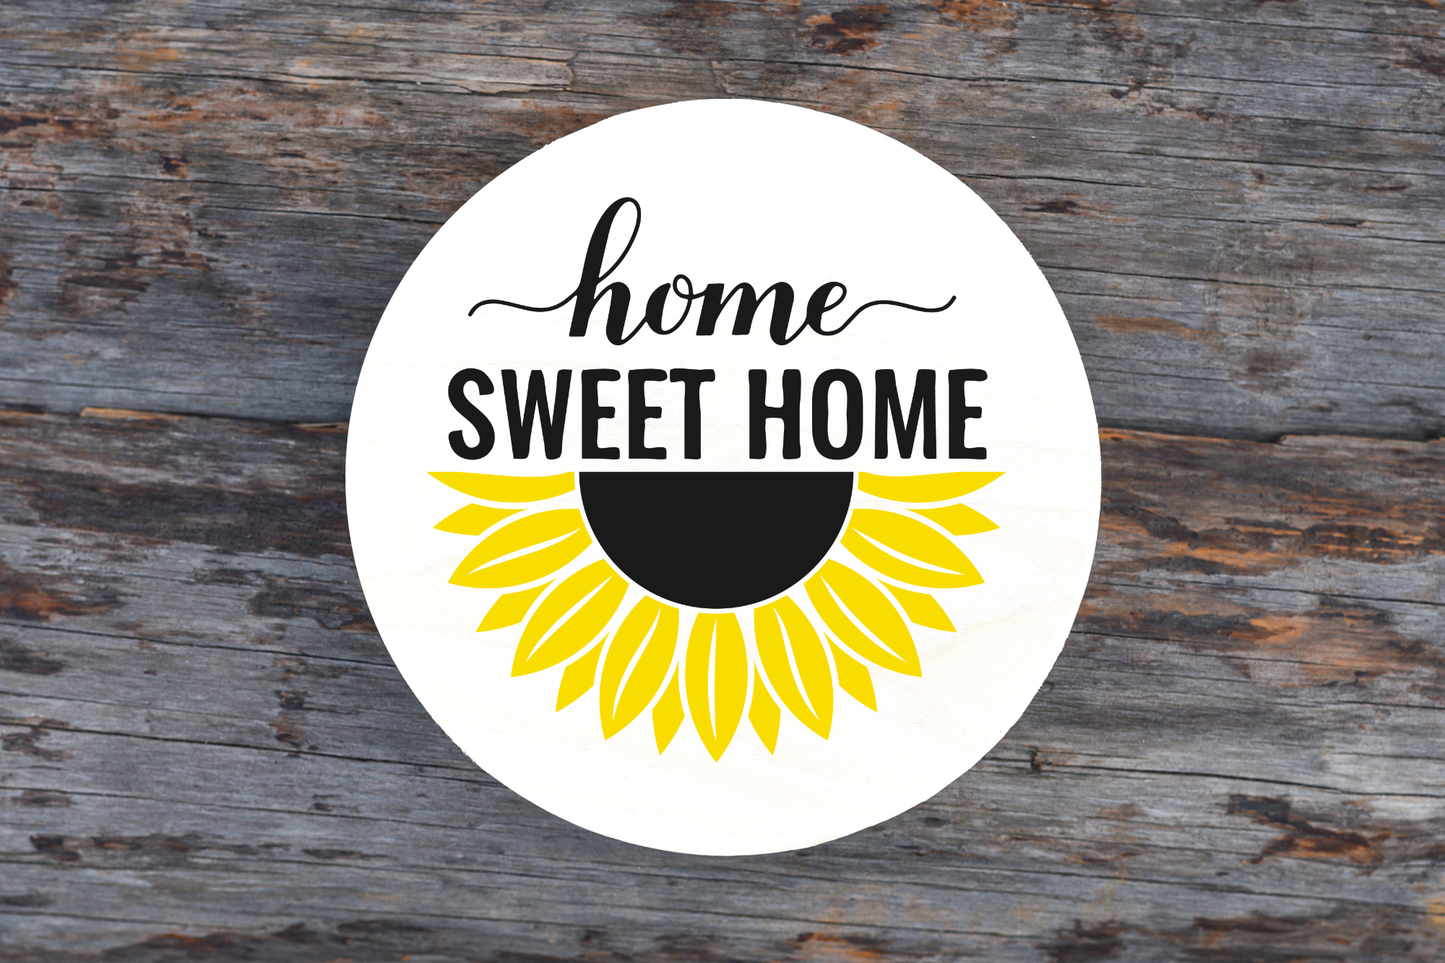 Home Sweet Home Sunflower Round Sign